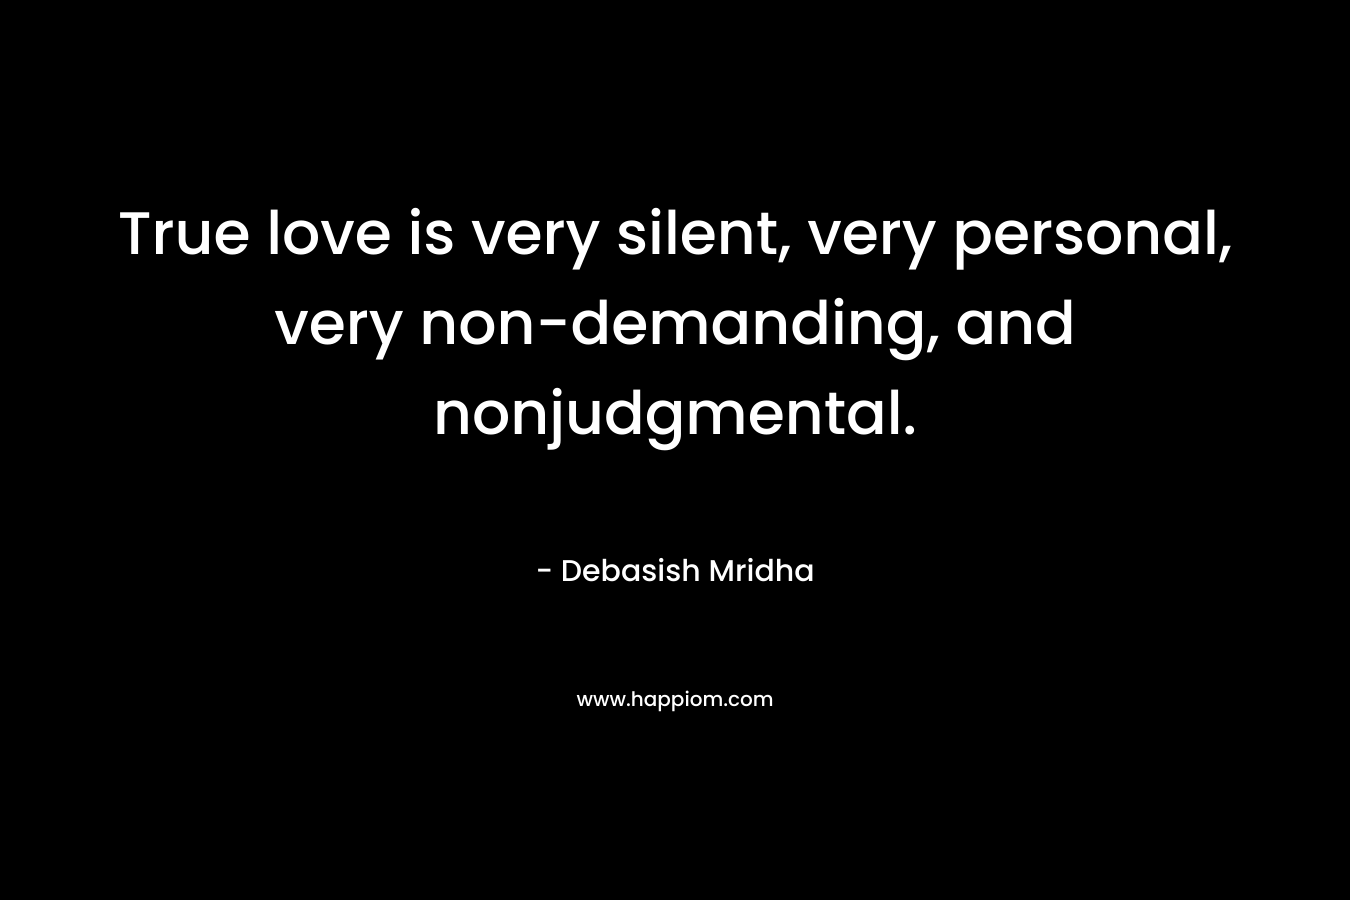 True love is very silent, very personal, very non-demanding, and nonjudgmental.